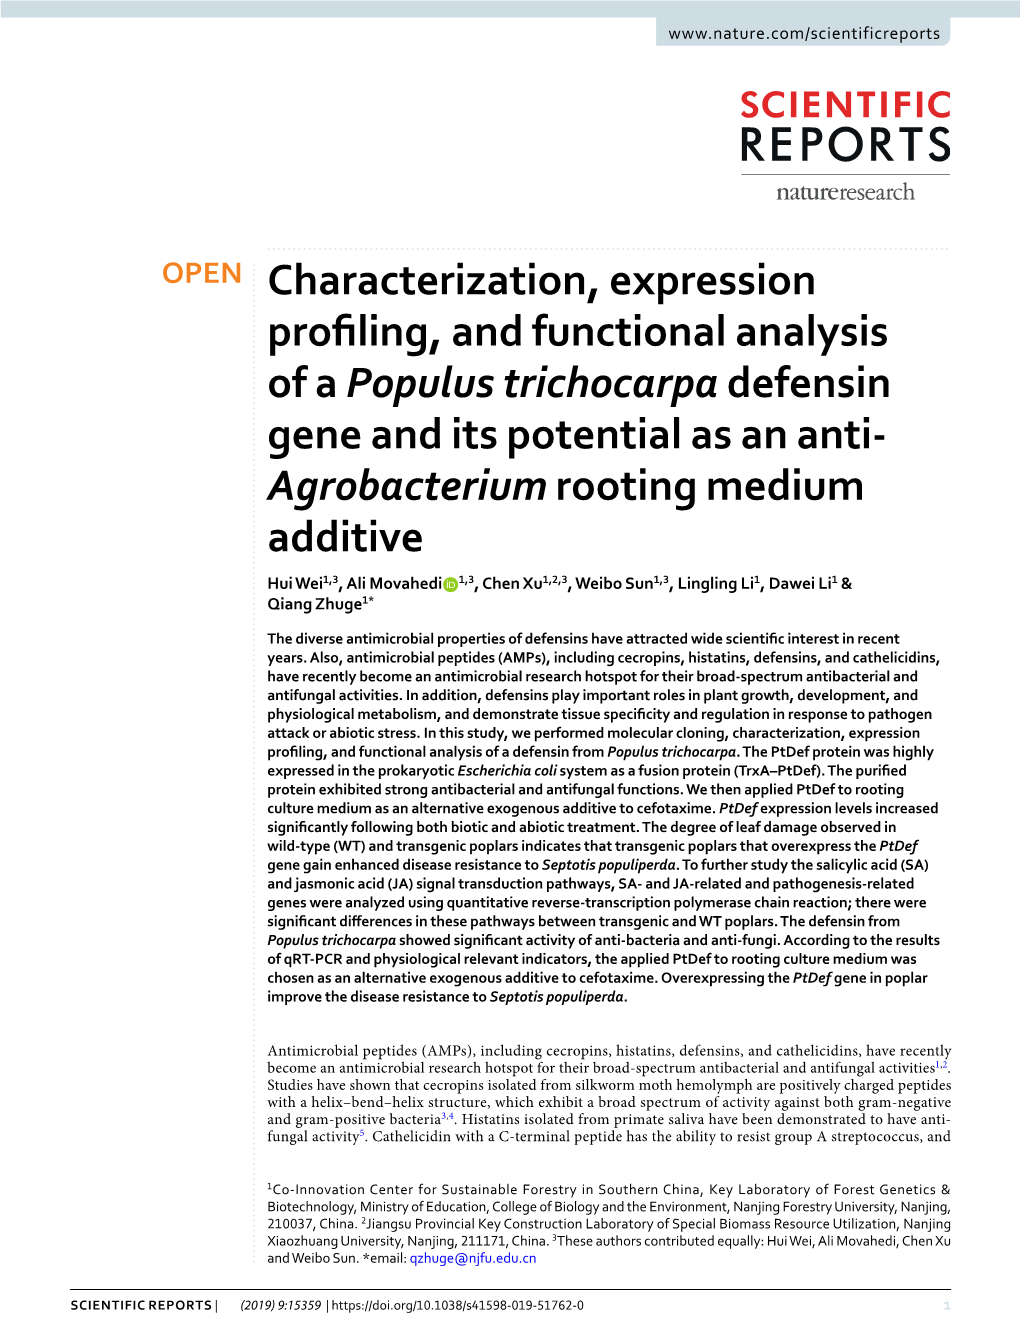 Characterization, Expression Profiling, and Functional Analysis of a Populus Trichocarpa Defensin Gene and Its Potential As an A